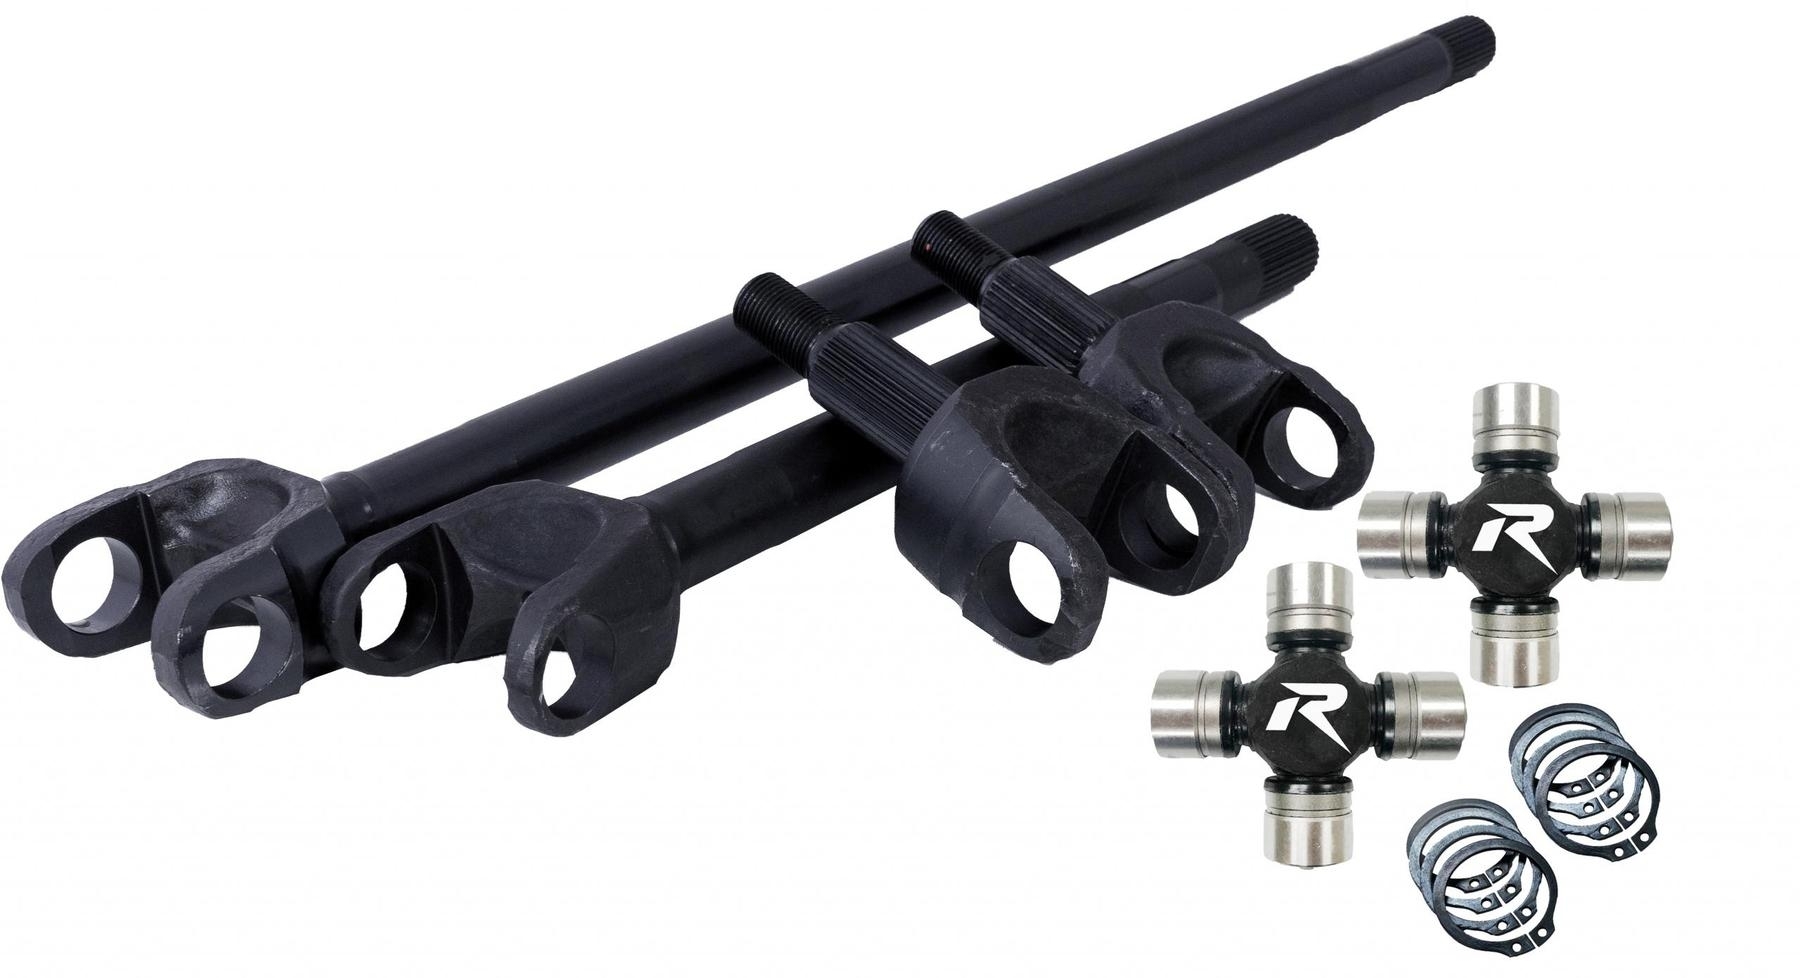 Revolution Gear & Axle Discovery Series 4340 Chromoly Front Axle Kit, Dana 30, Larger 1350 Style Hd